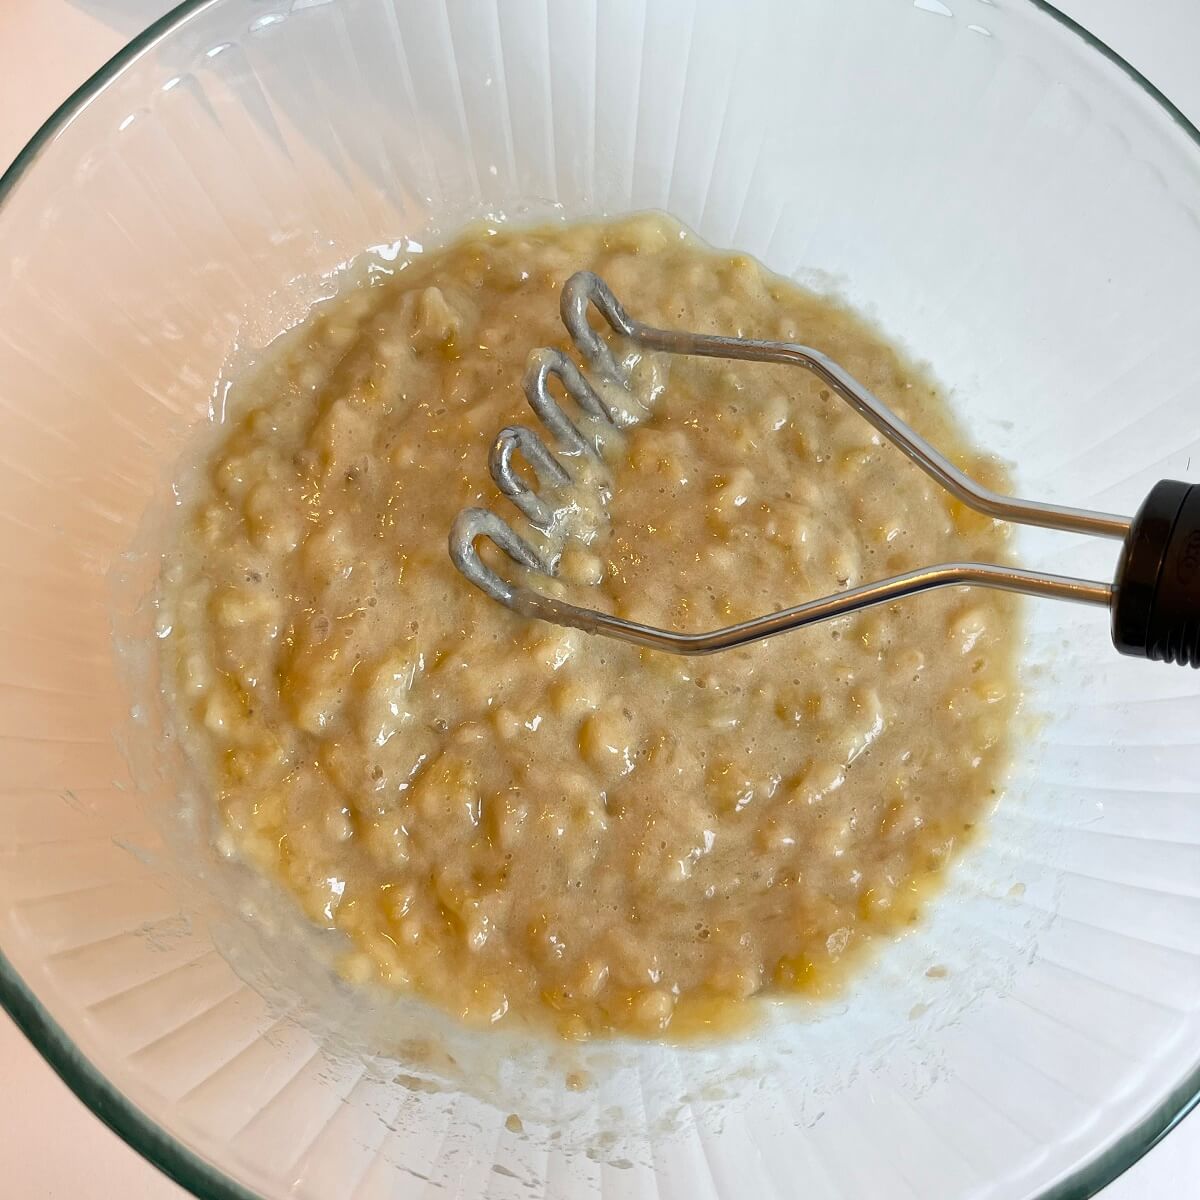 Mashed bananas in a large glass mixing bowl.